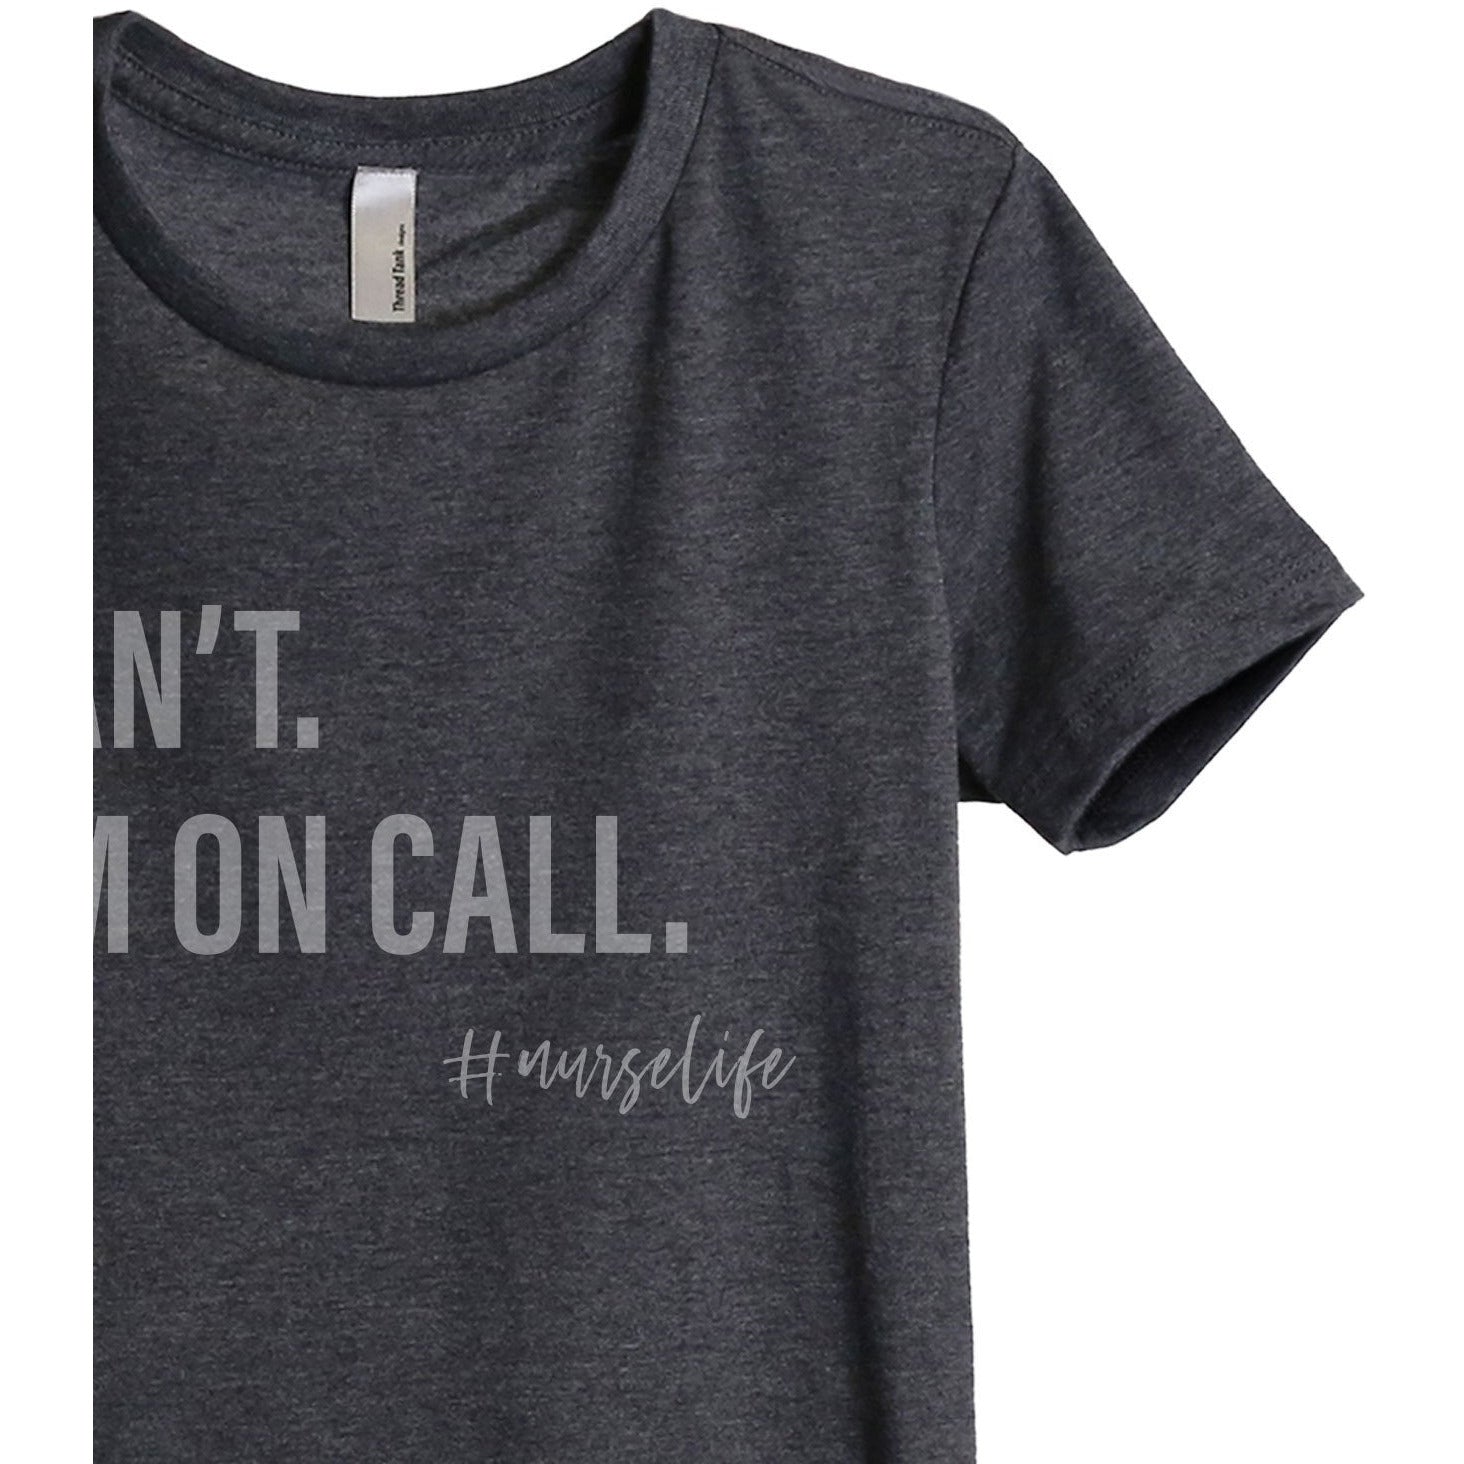 Can't I'm On Call Nurse Life Women's Relaxed Crewneck T-Shirt Top Tee Charcoal Grey Zoom Details